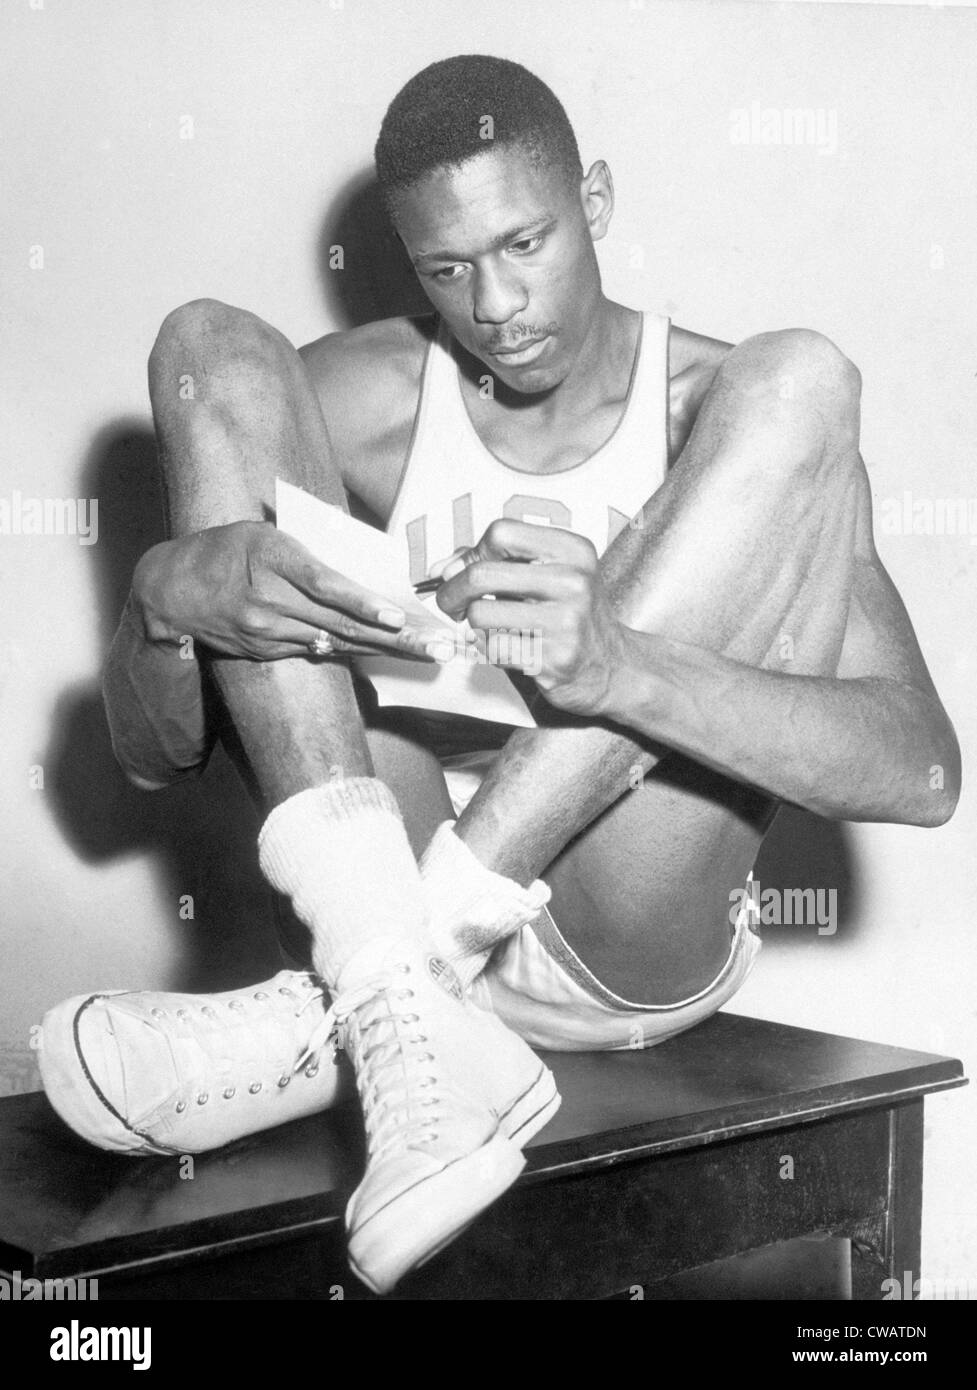 Bill russell where stock photography images - Alamy